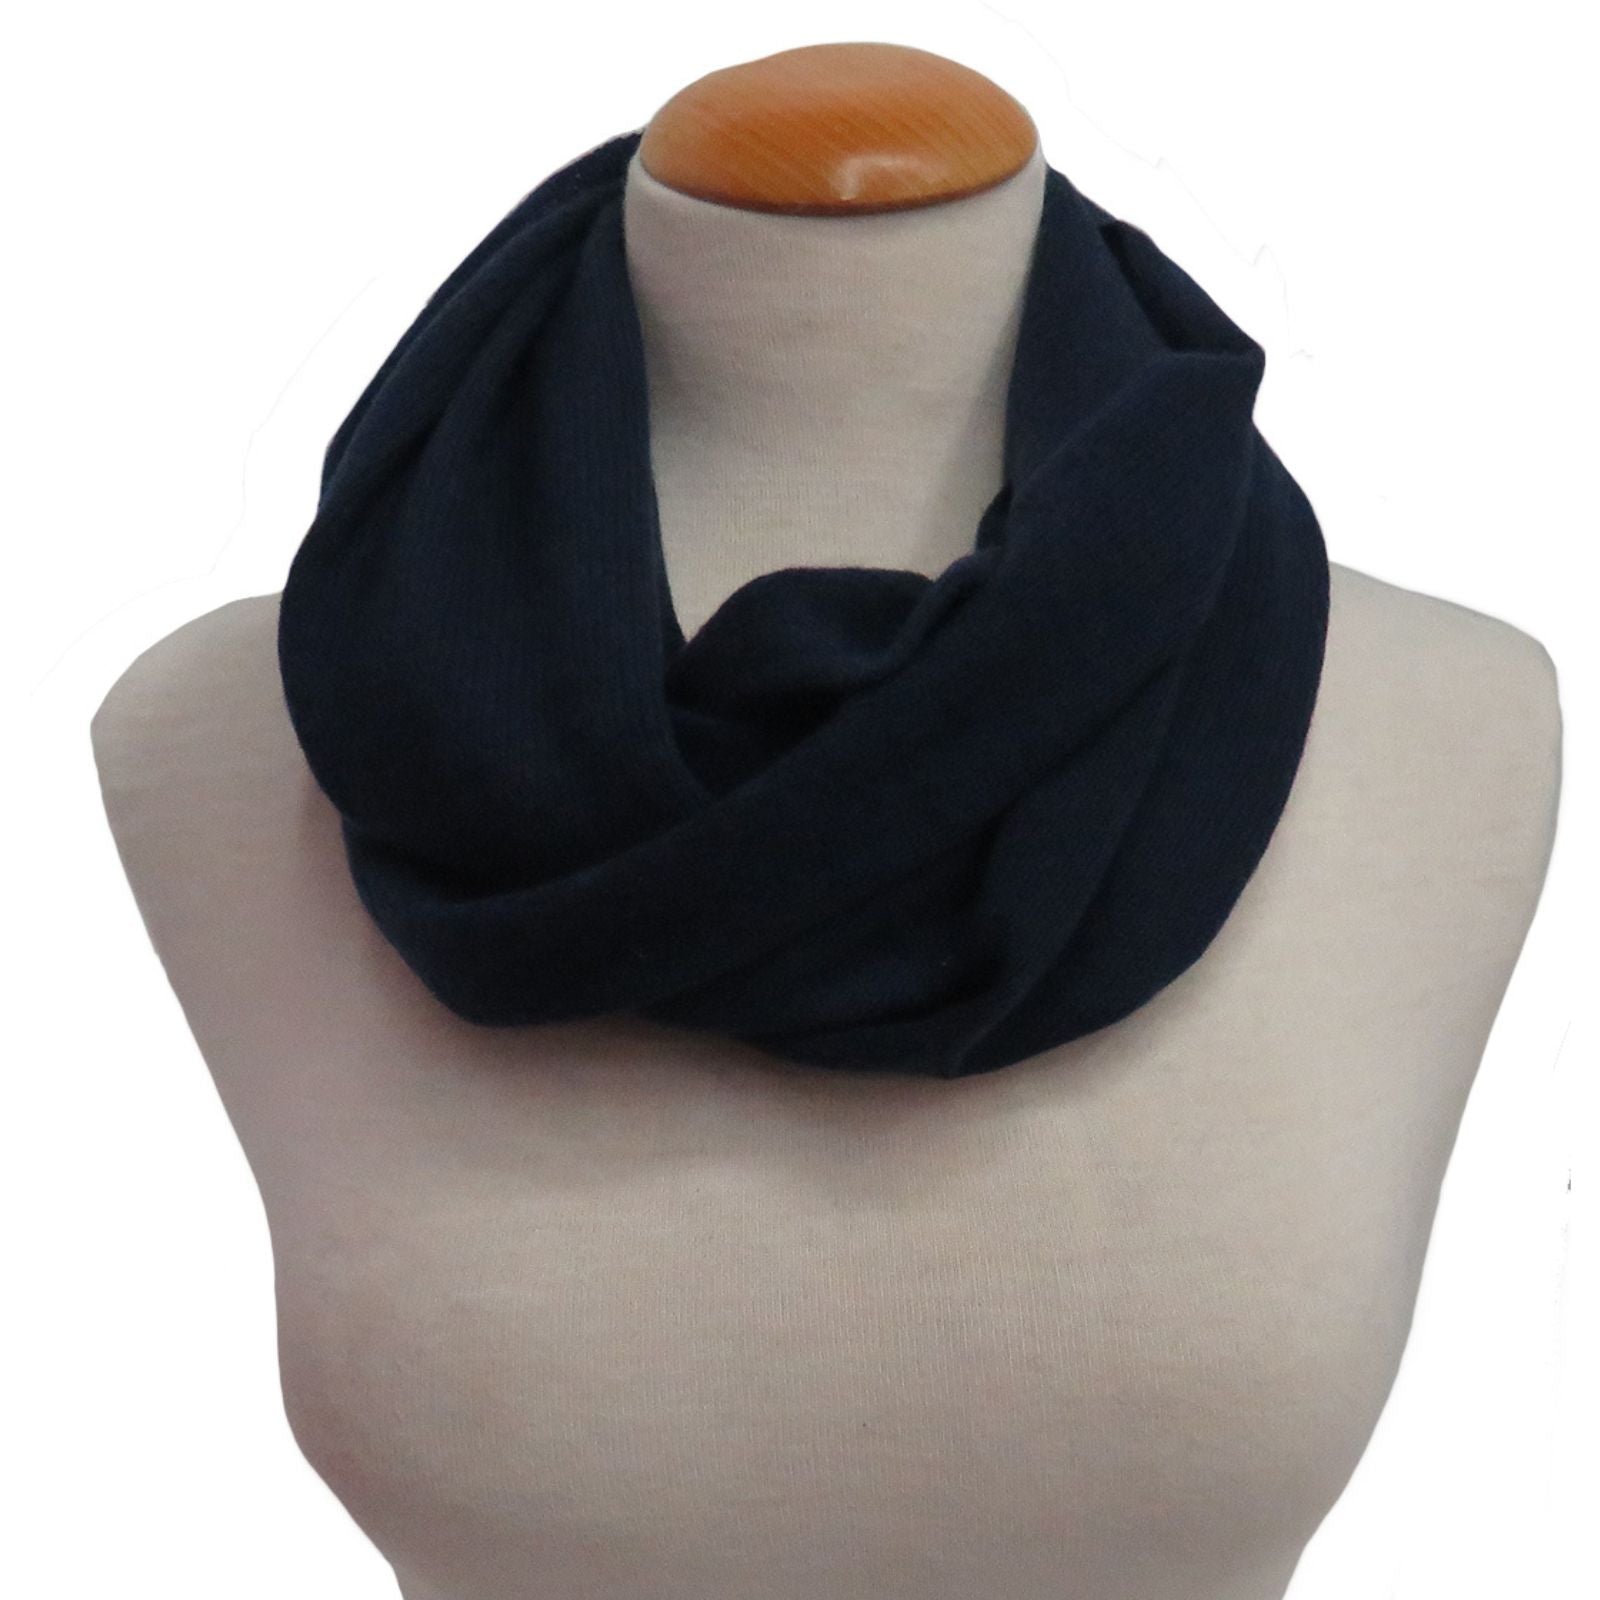 Women's Woven Cashmere Scarf